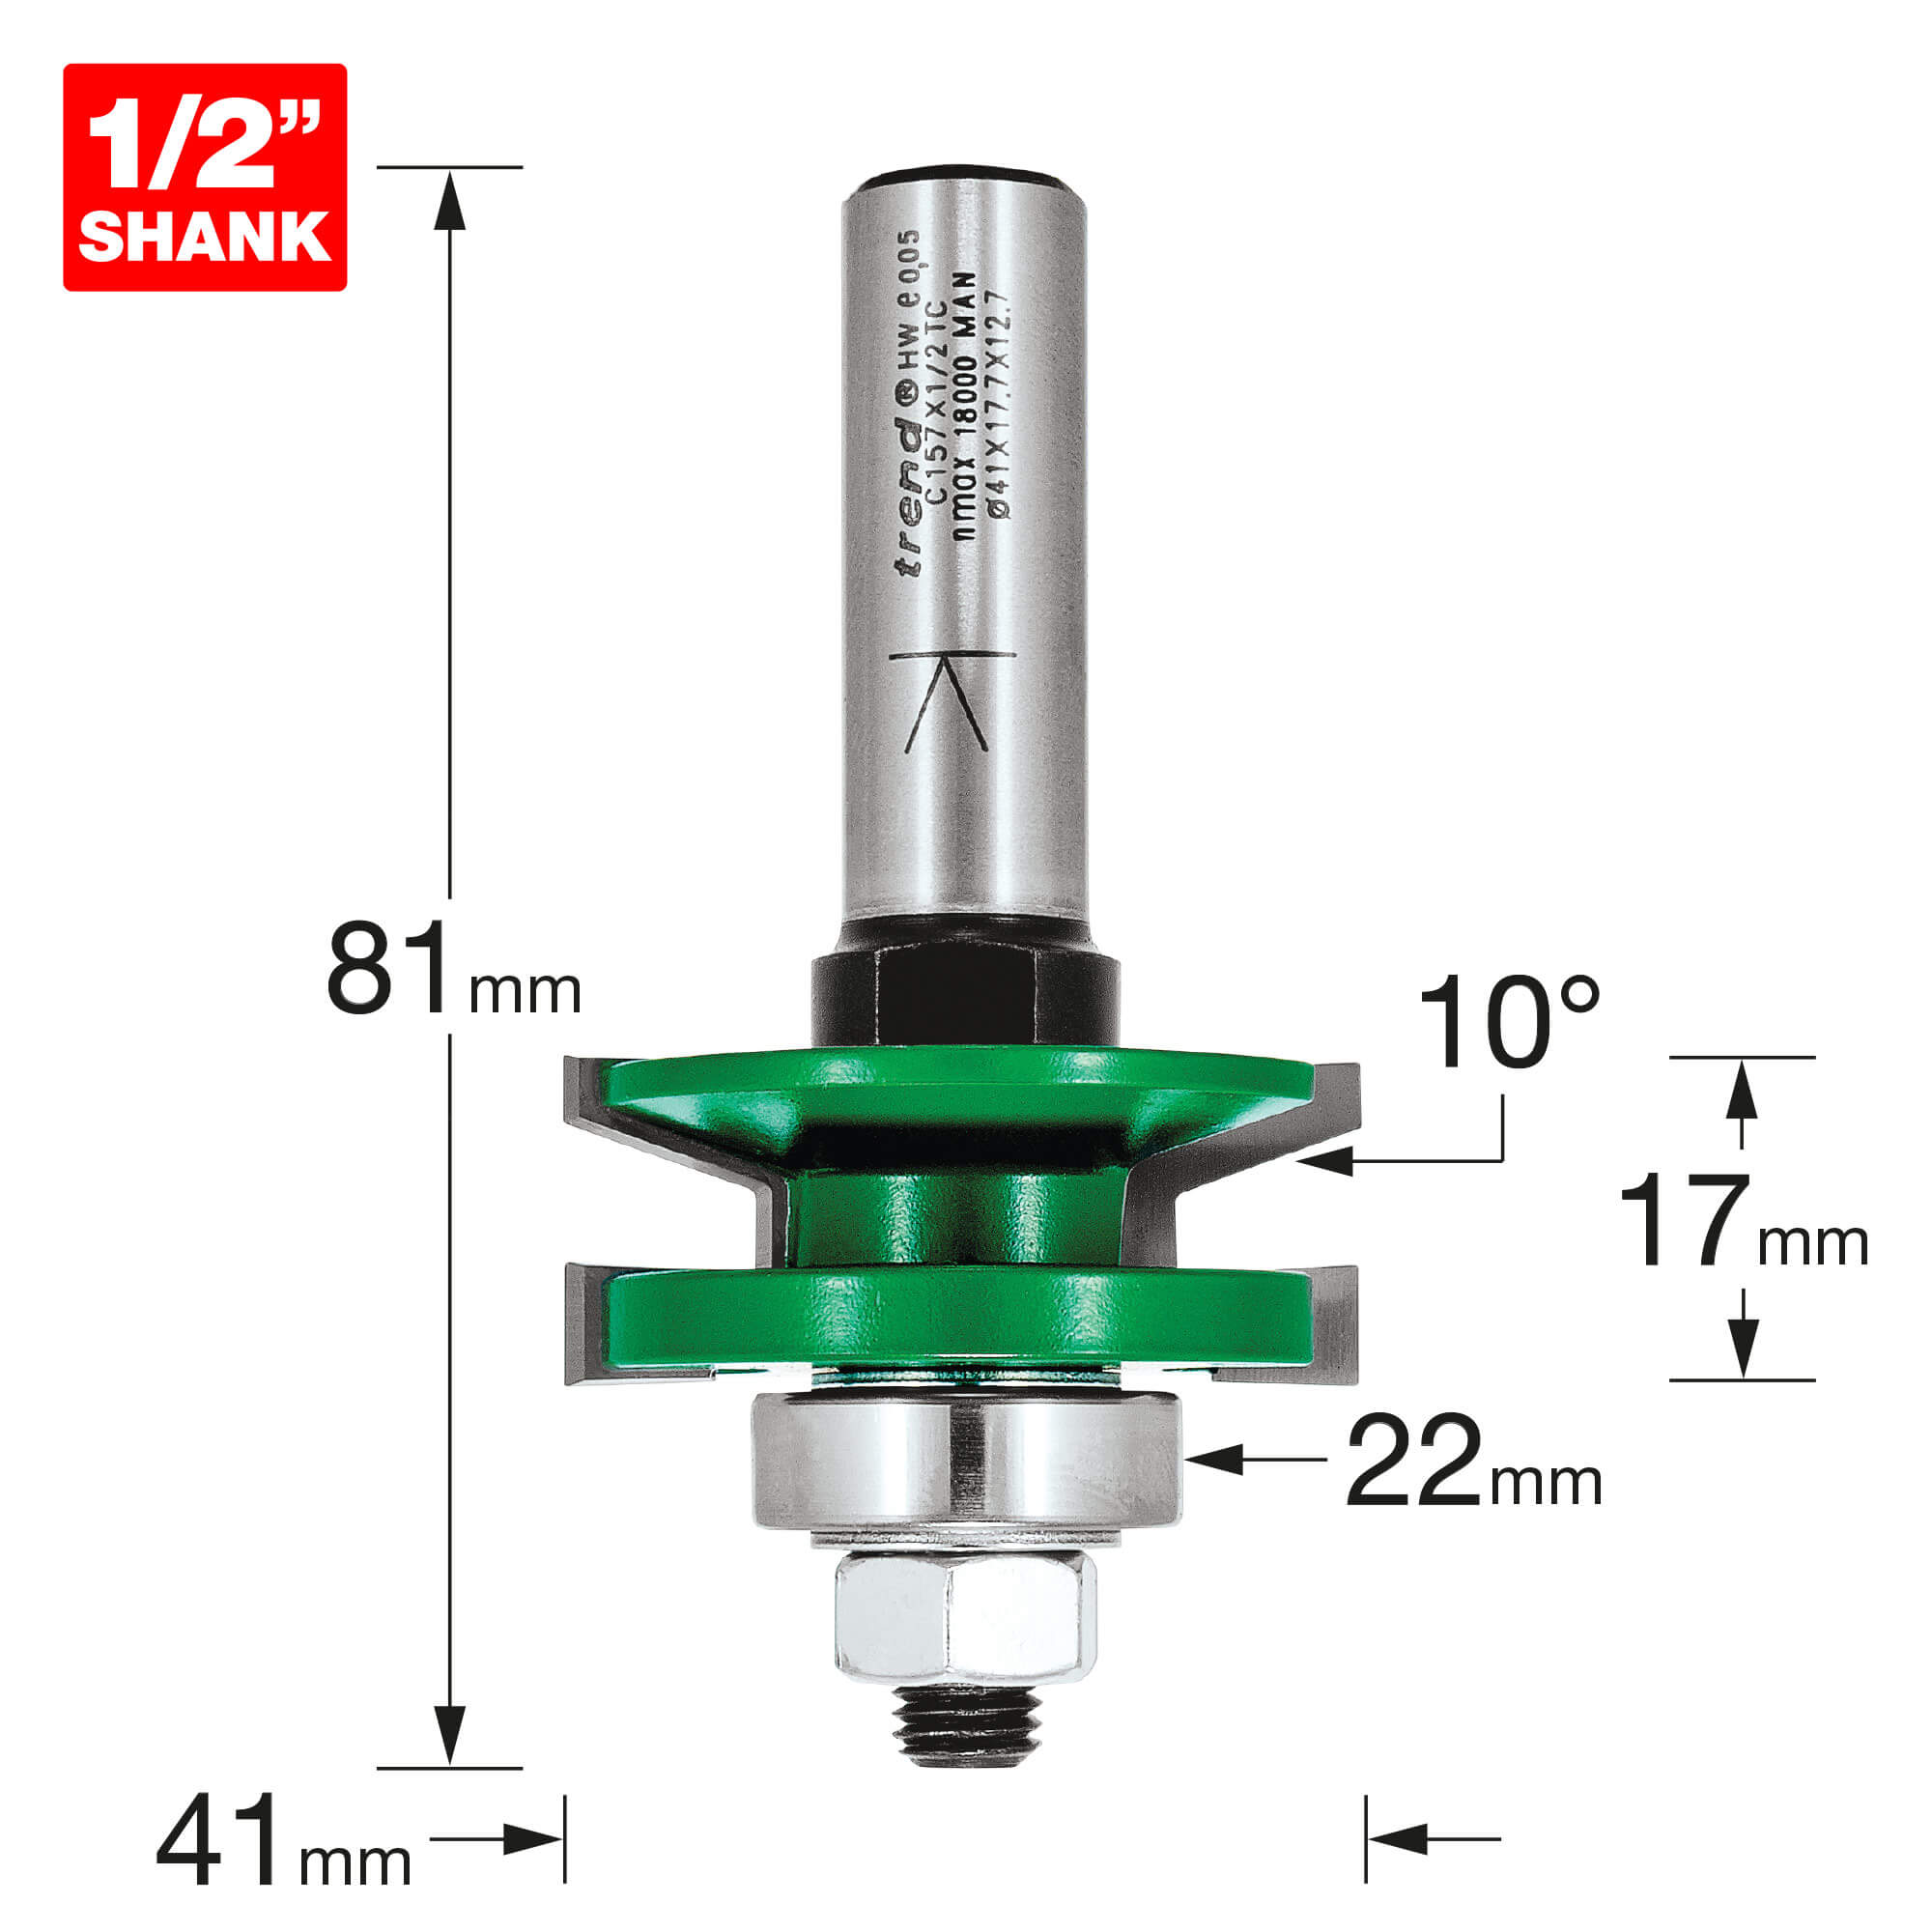 Image of Trend CRAFTPRO Bearing Guided Combination Raised Bevel Router Cutter 41mm 17mm 1/2"